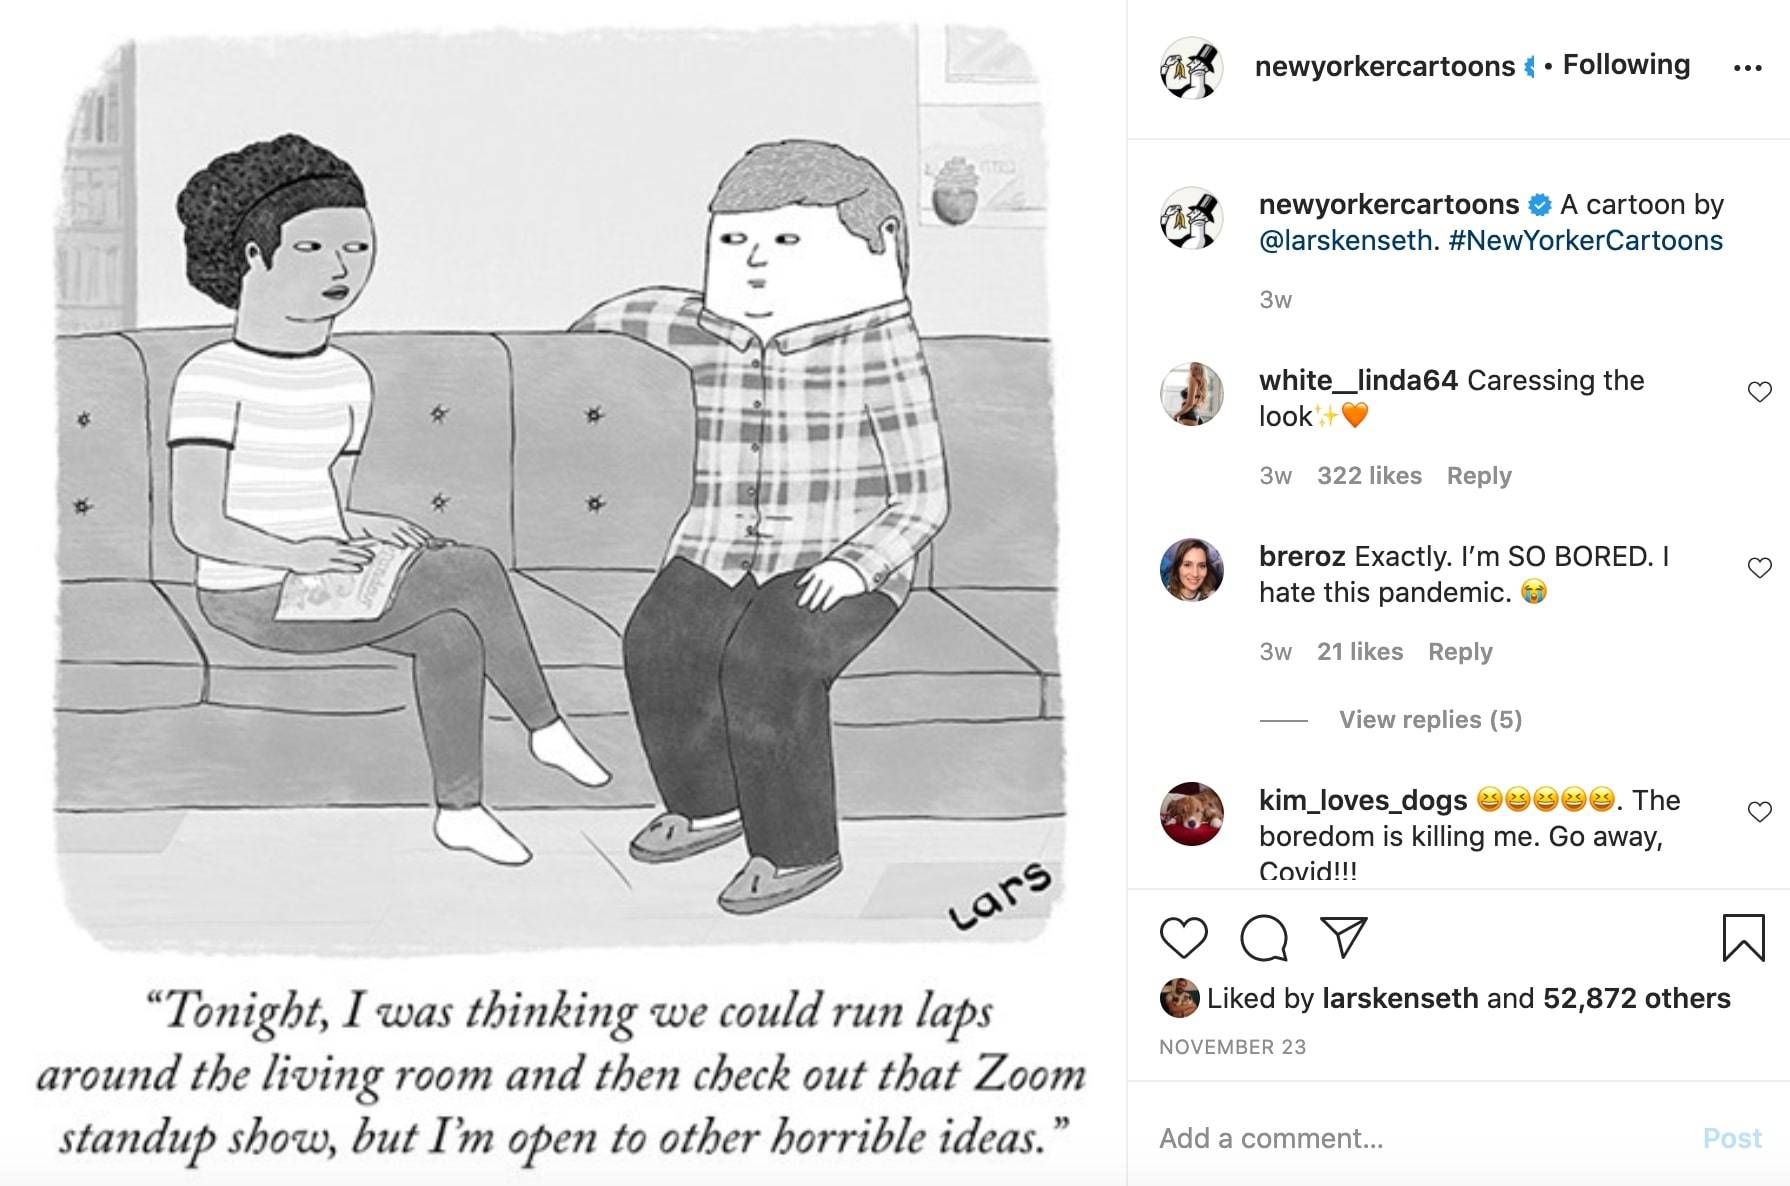 New Yorker cartoon of couple on couch, humor in dark times